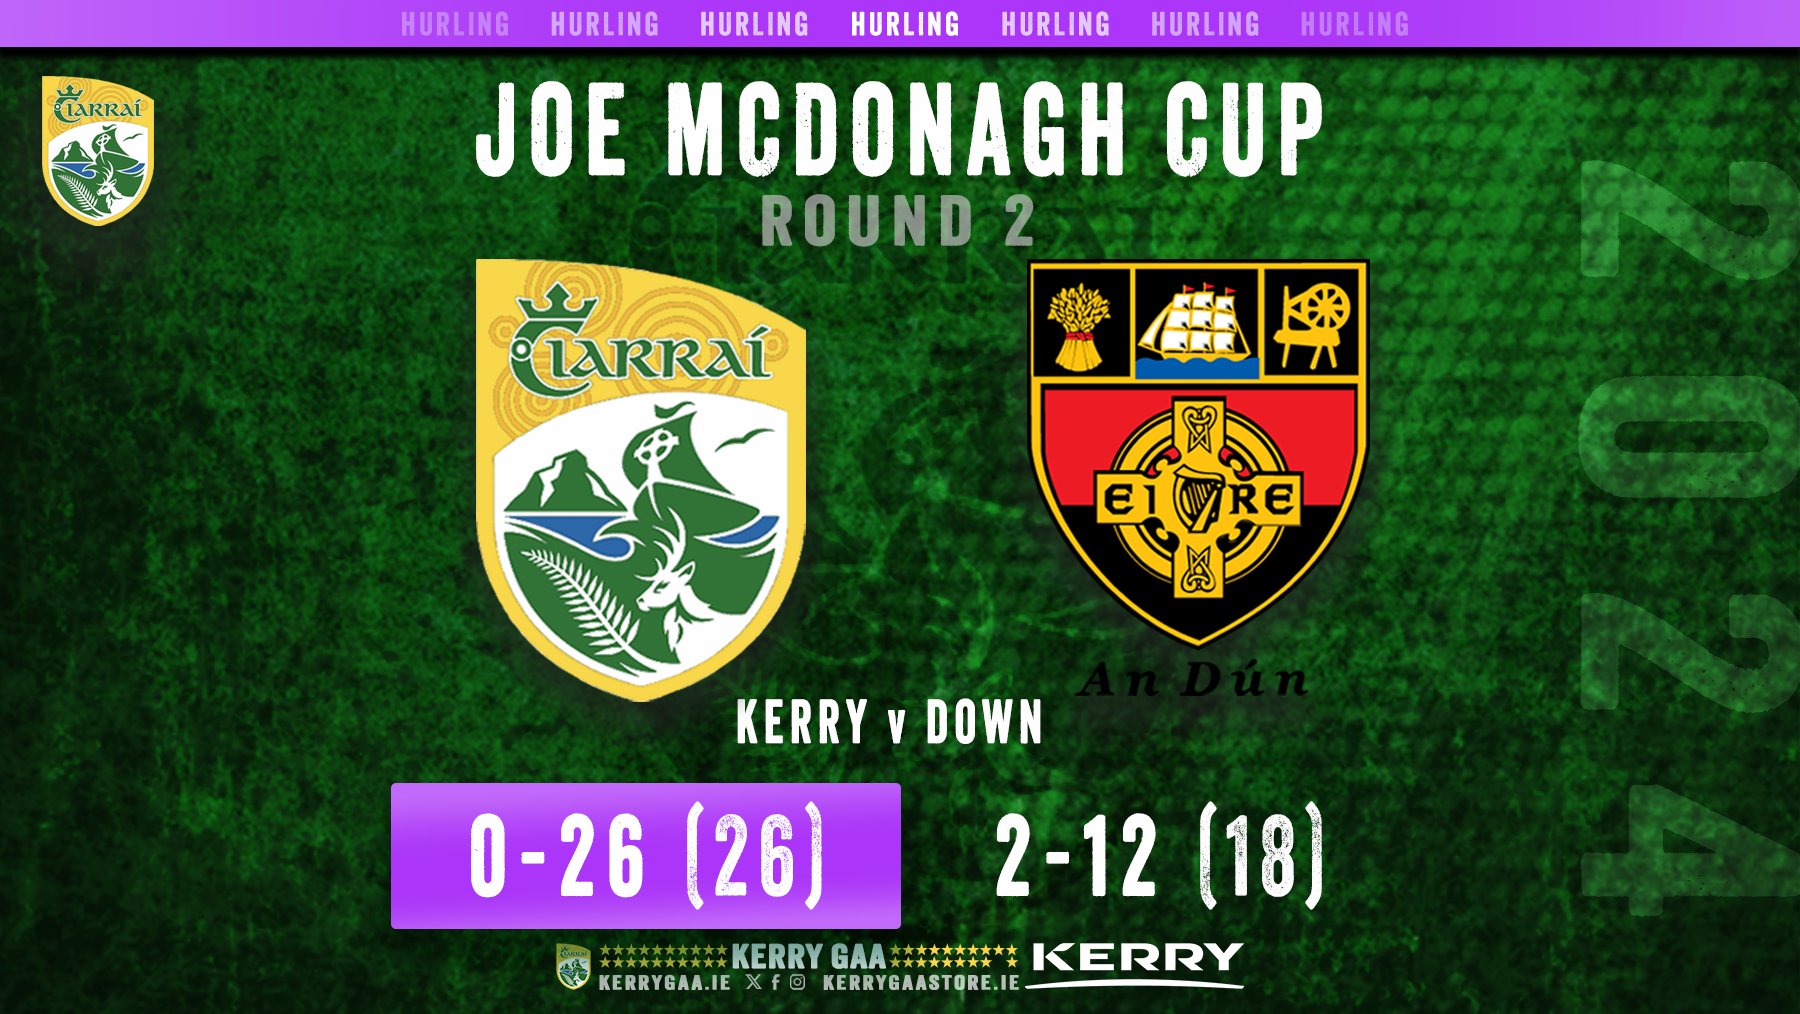 Victory for Kerry over Down in Joe McDonagh Cup